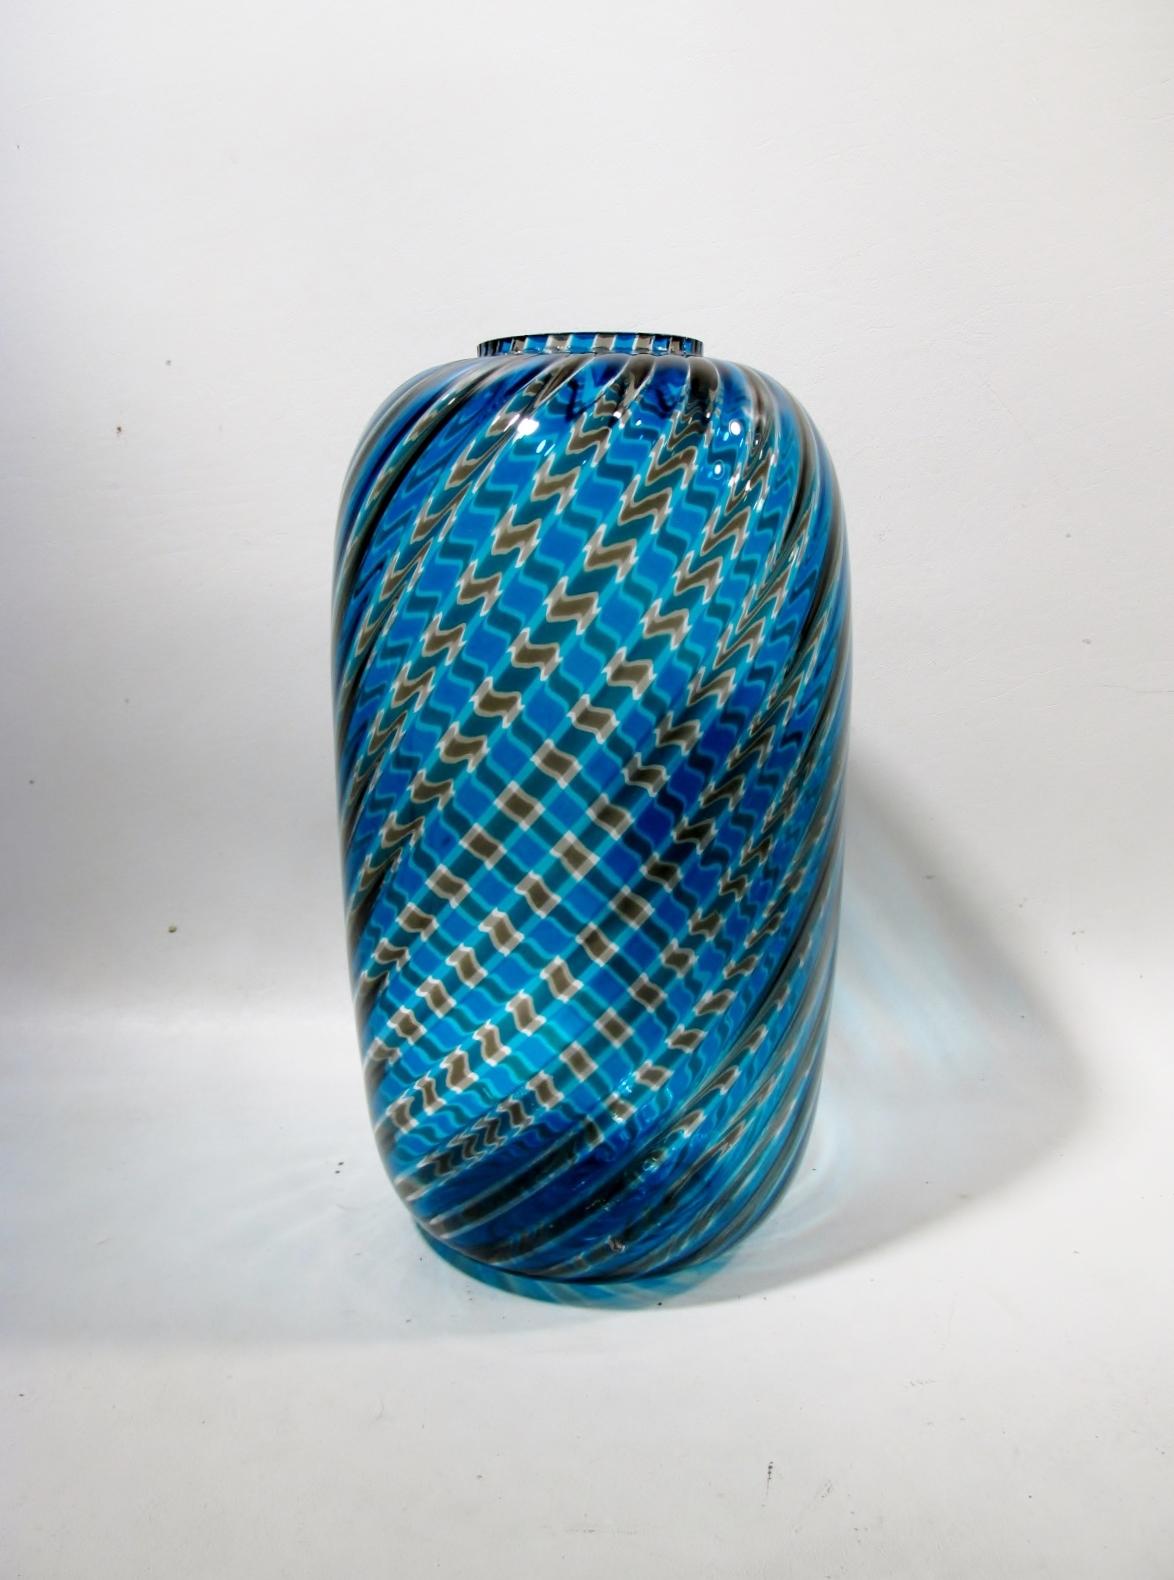 Iconic modernist 10” tall and 6” diameter swirling “A Canna” Venetian glass vase by Paolo Venini for his renowned workshop. Signed to base Venini Italia, 1981.